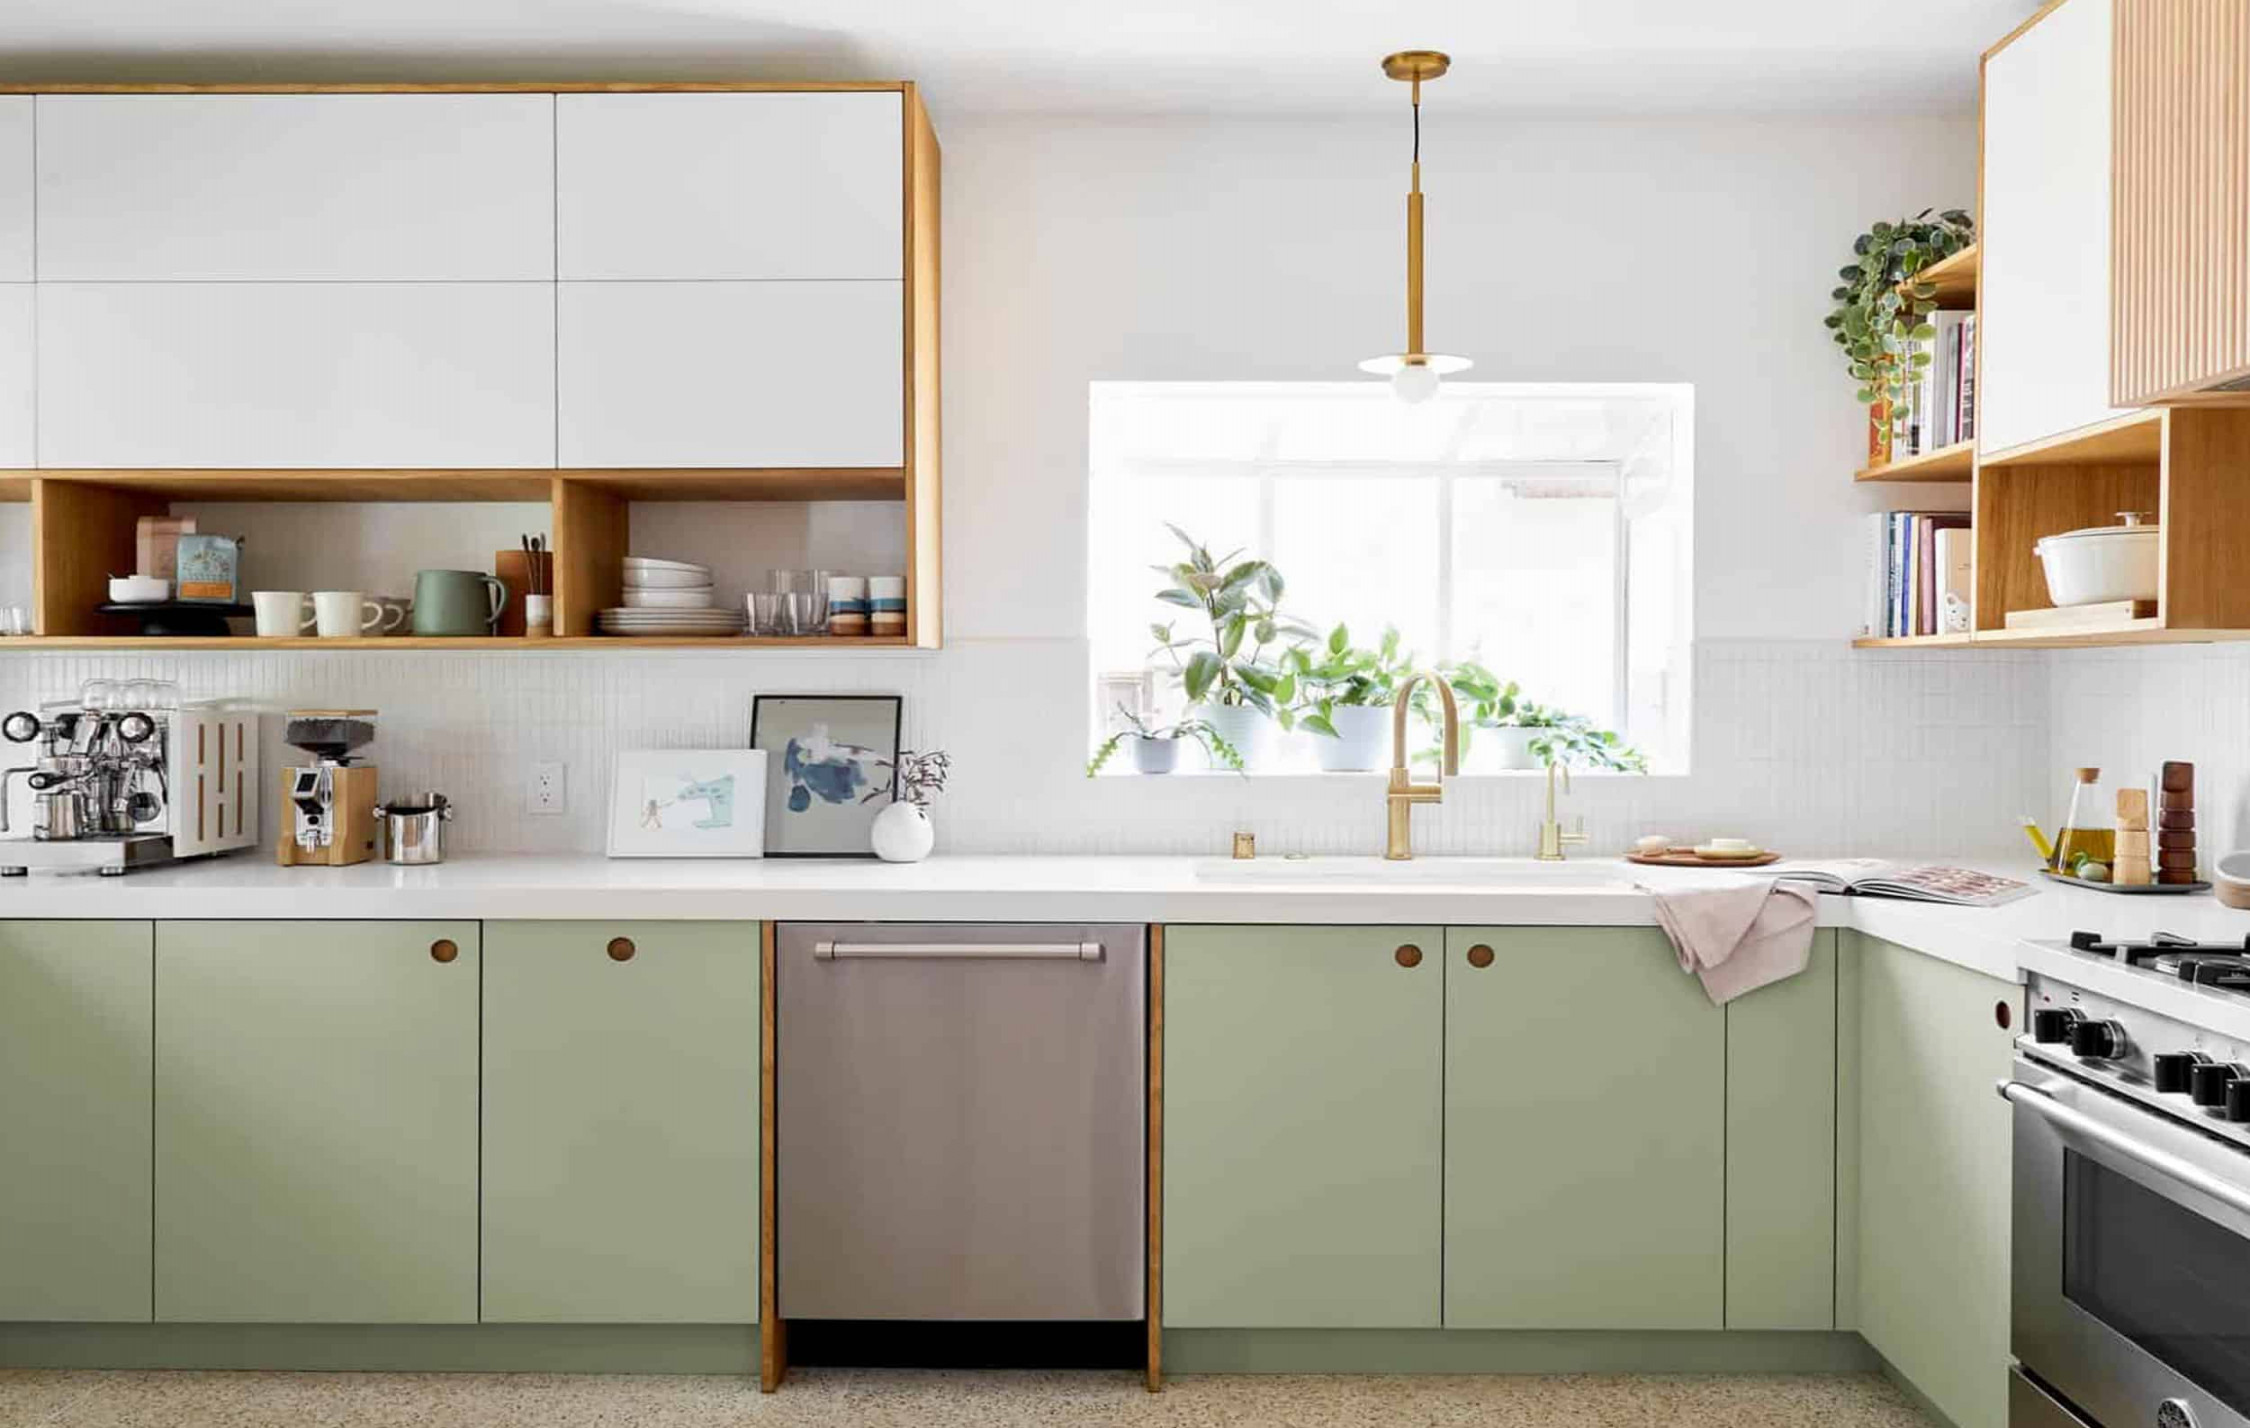 All The IKEA Cabinet Front Companies You Should Know Before